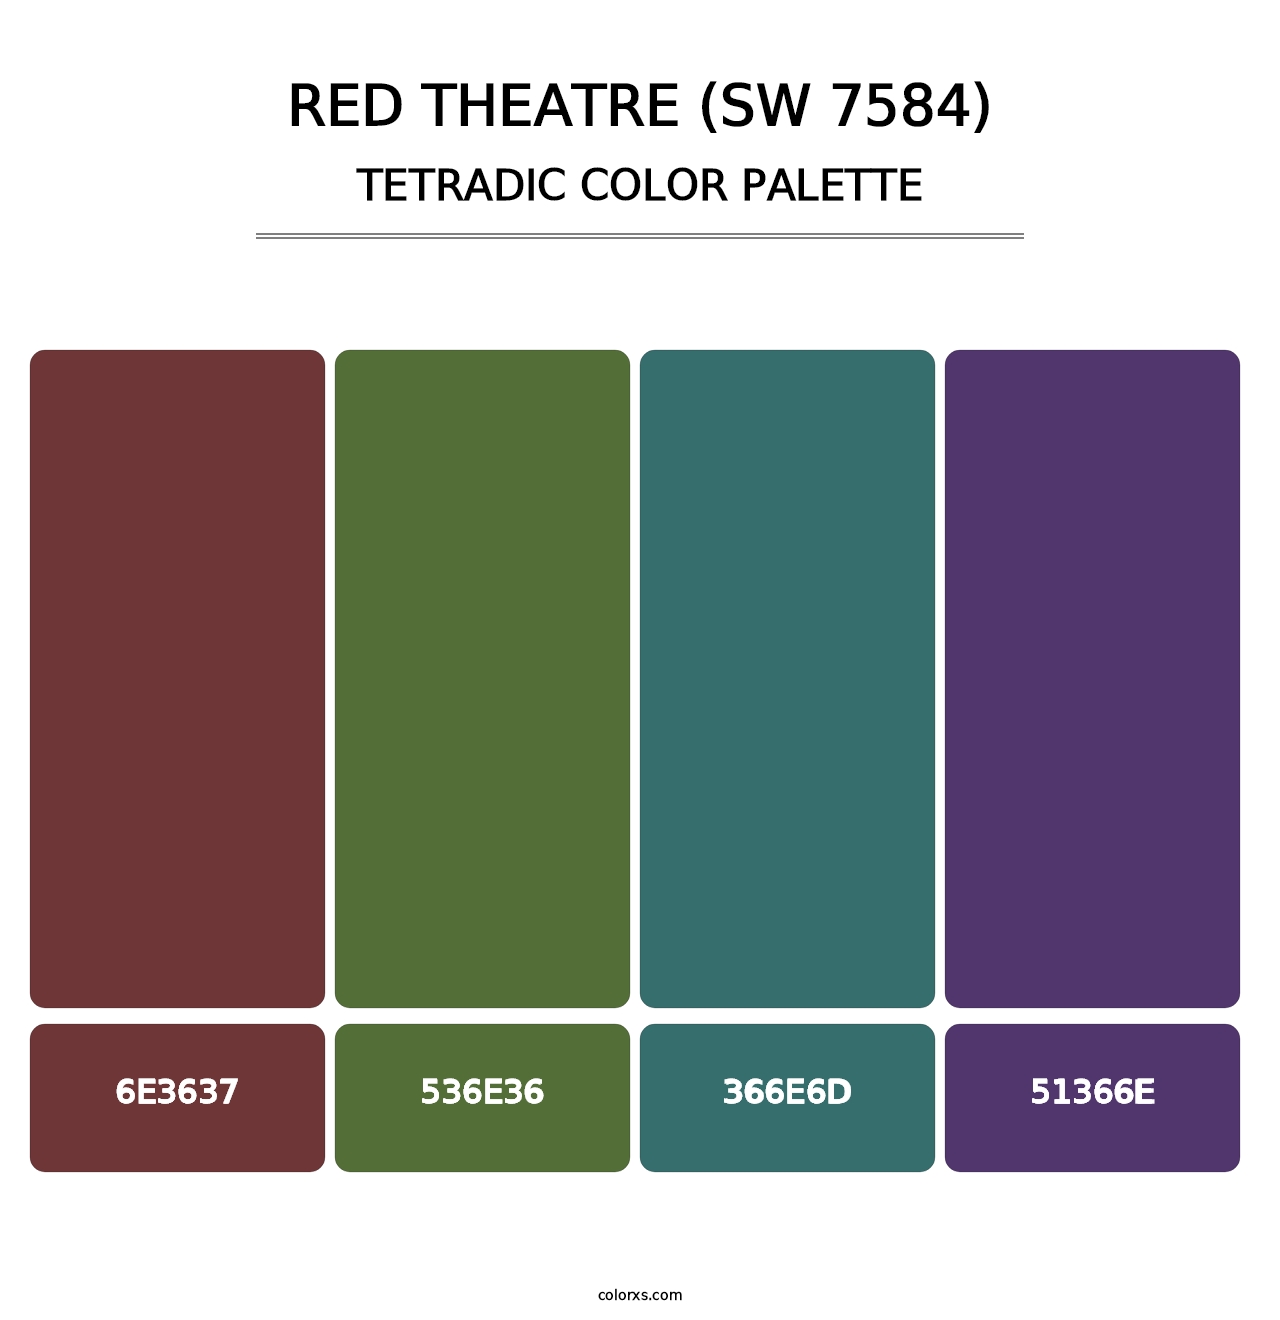 Red Theatre (SW 7584) - Tetradic Color Palette